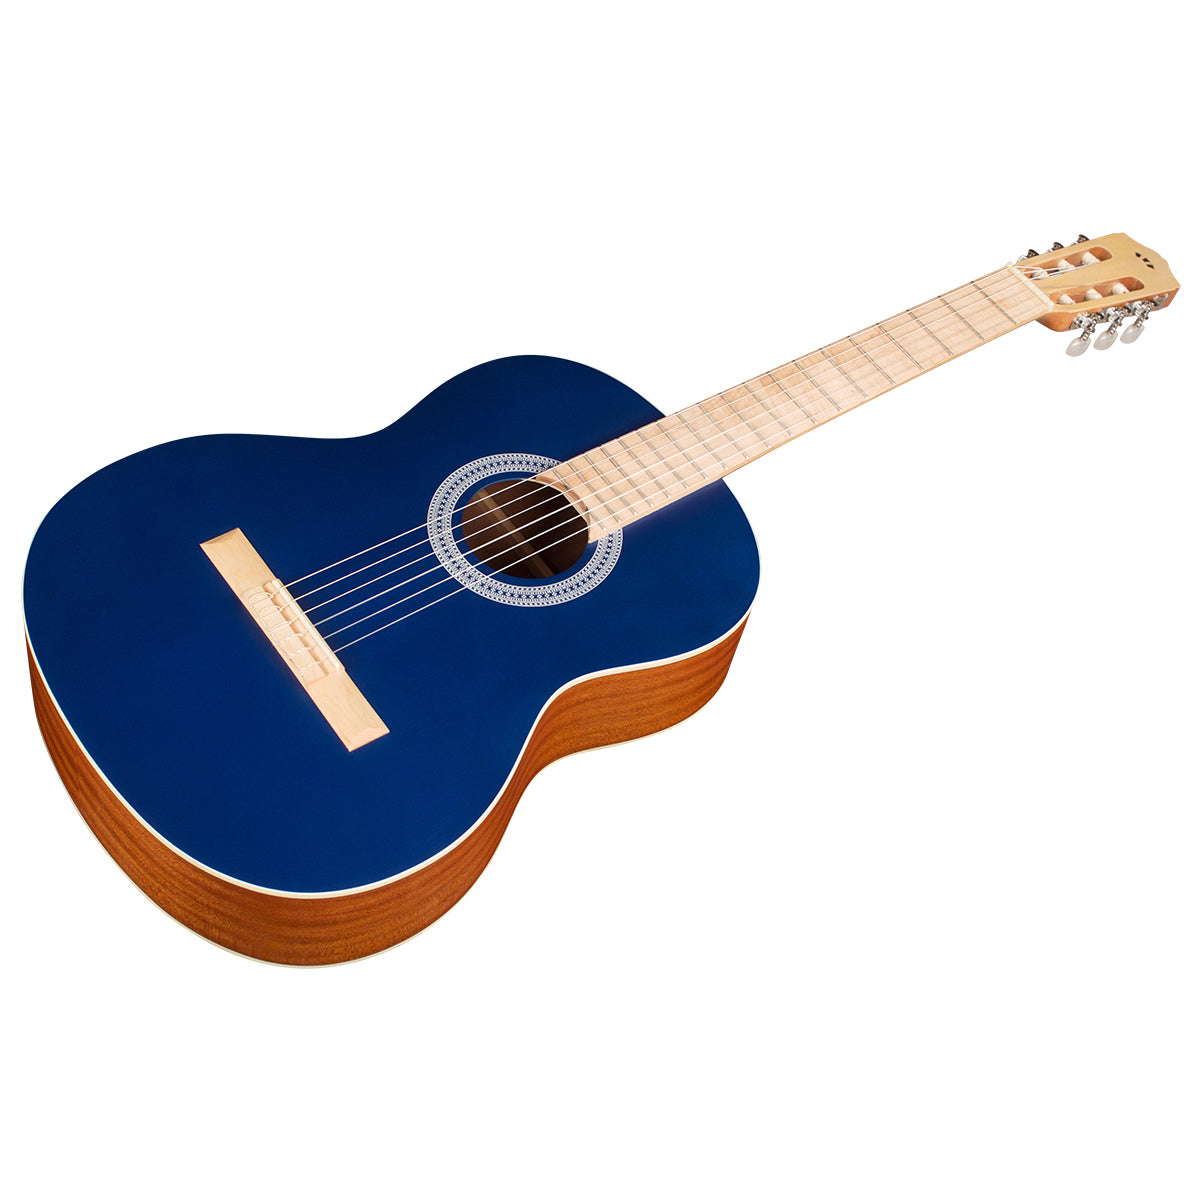 Cordoba Protege C1 Matiz Classical Guitar in Classic Blue with Color-Matching Recycled Nylon Gig Bag